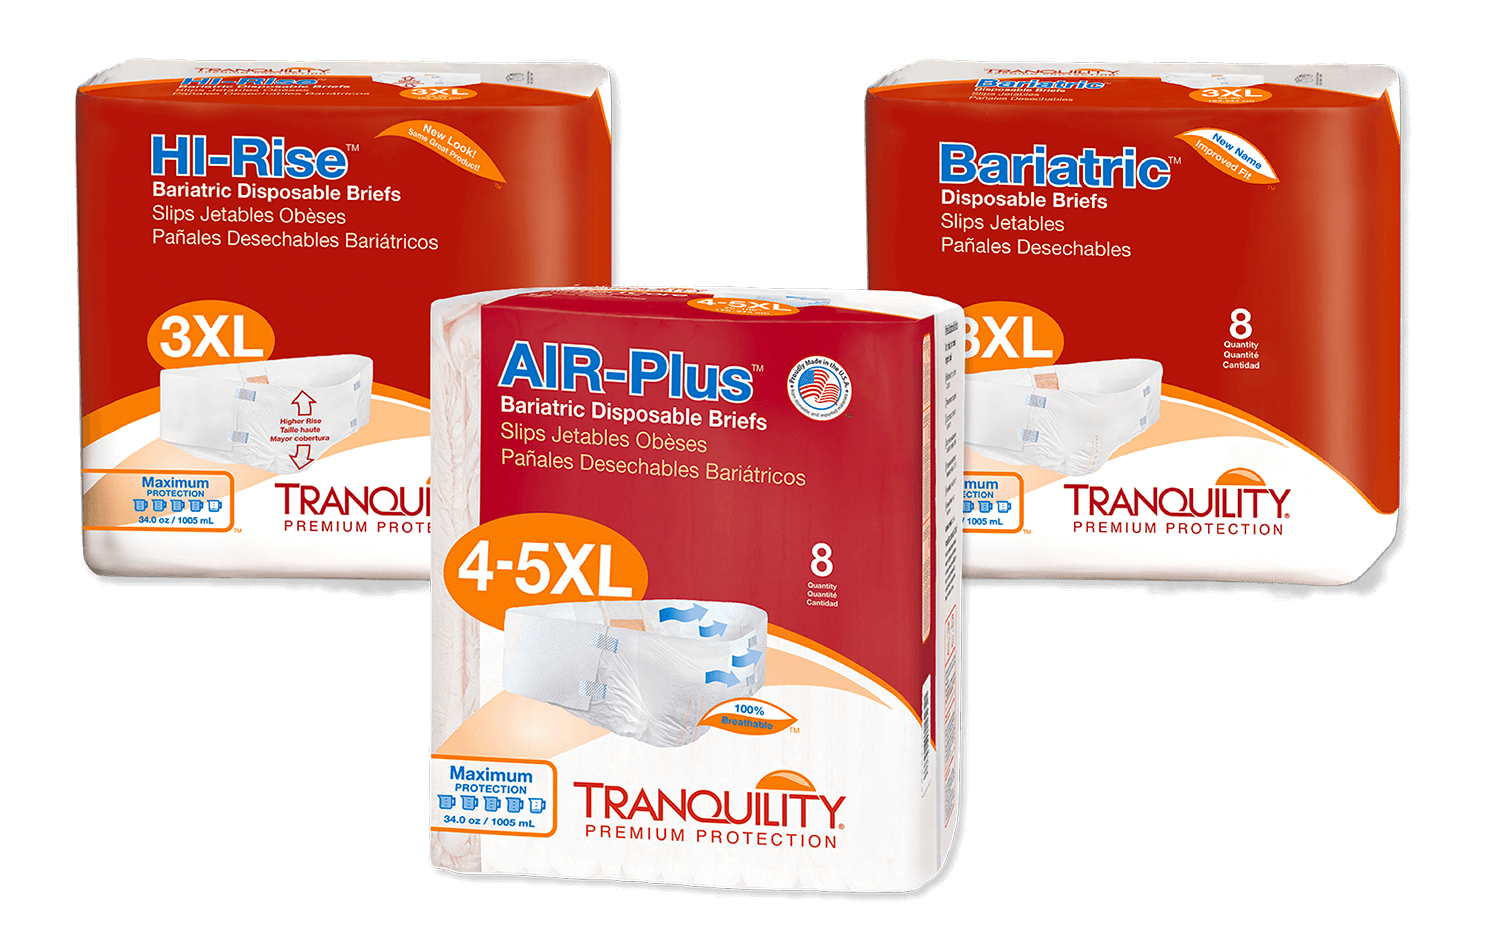  Tranquility Bariatric Disposable Briefs 3X-Large with